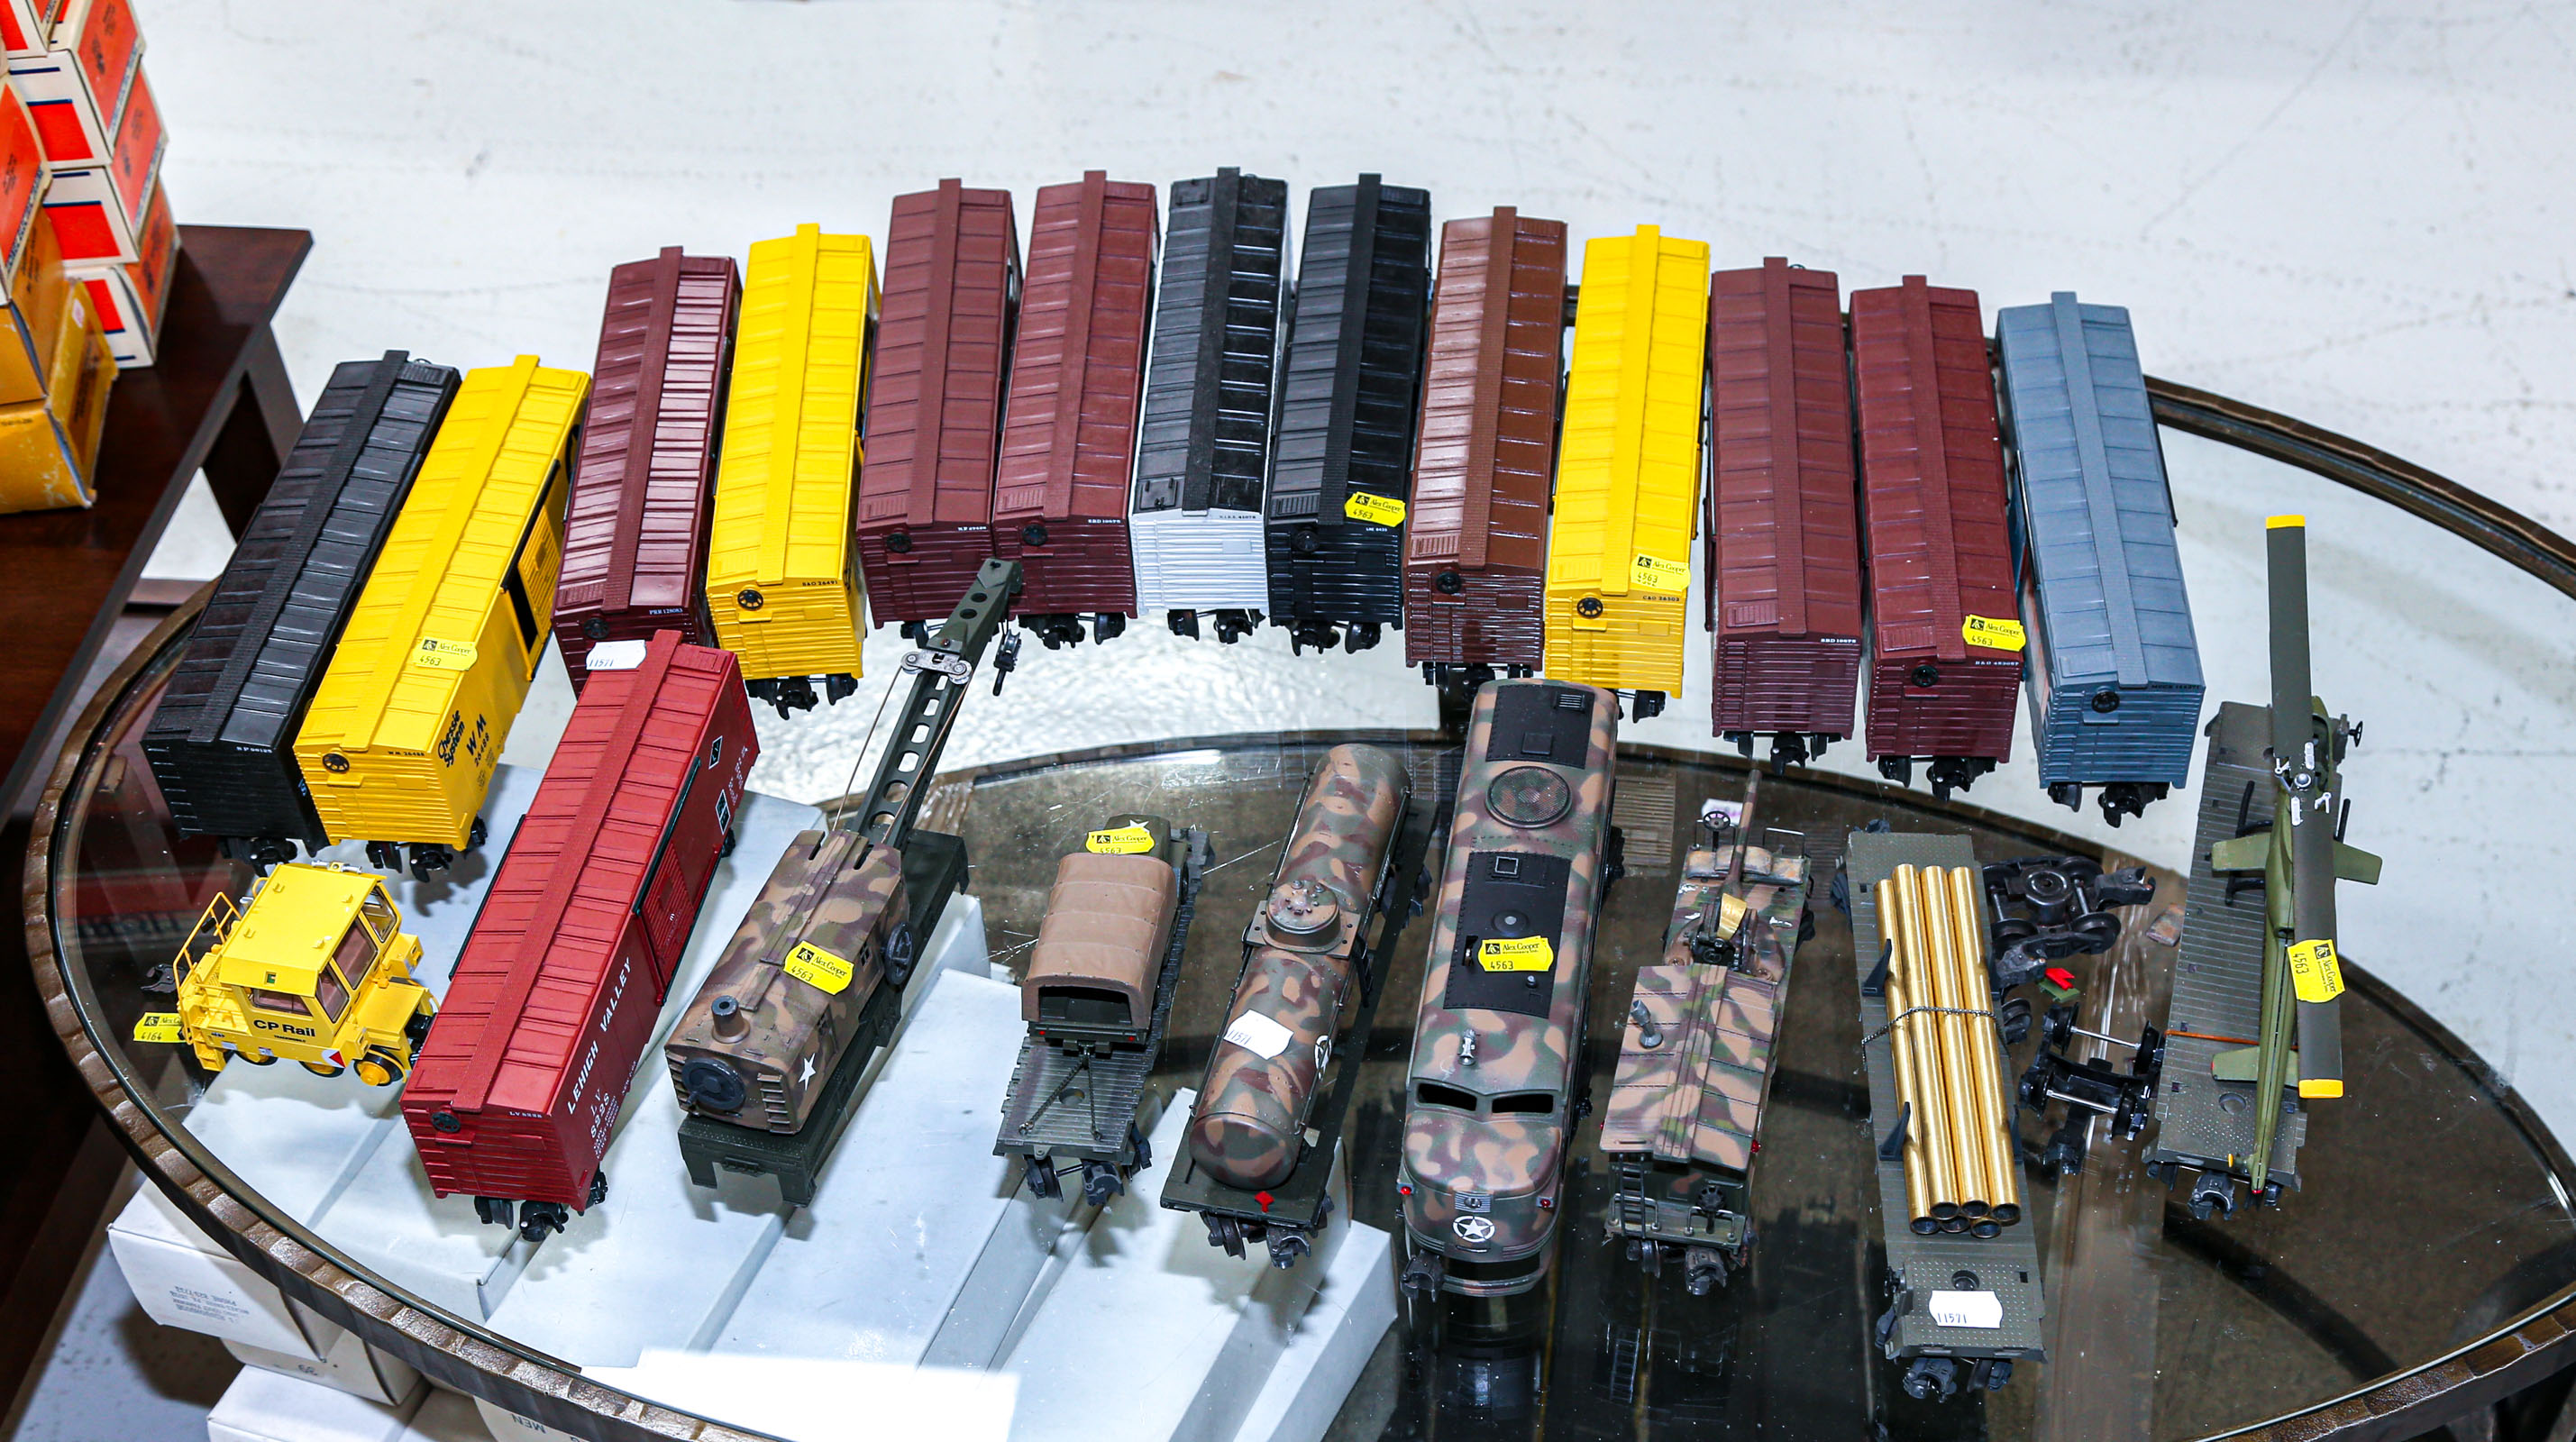 LARGE GROUP OF LIONEL TRAIN CARS